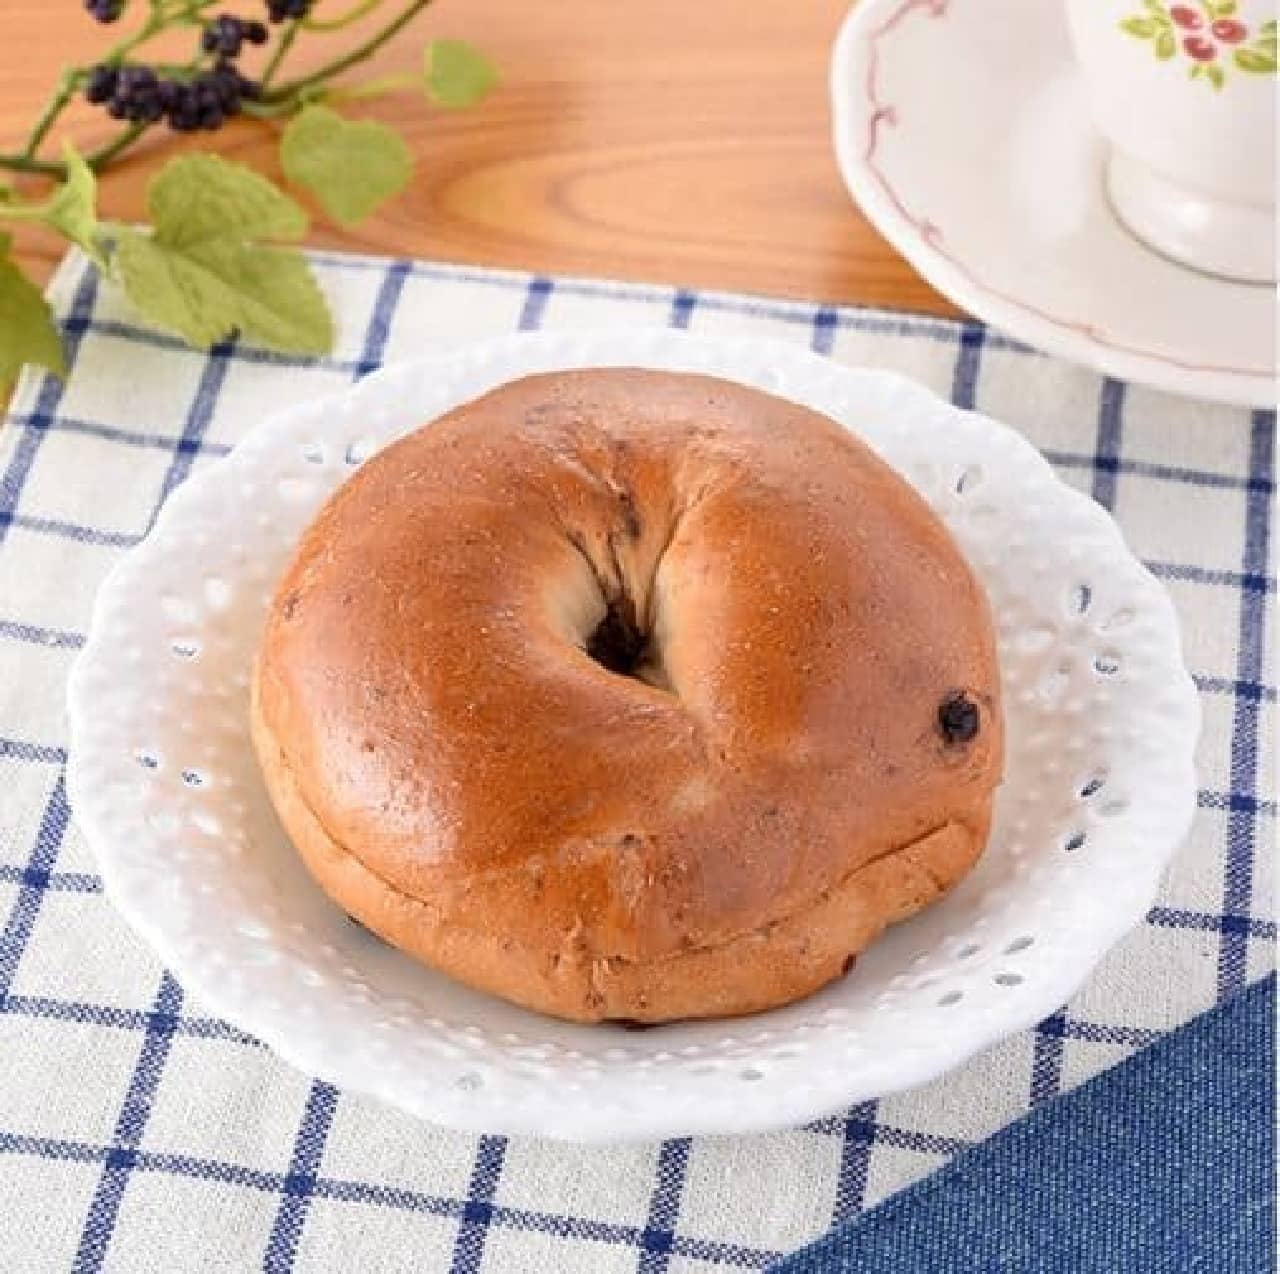 FamilyMart "Cranberry and chocolate bagels (cream cheese)"